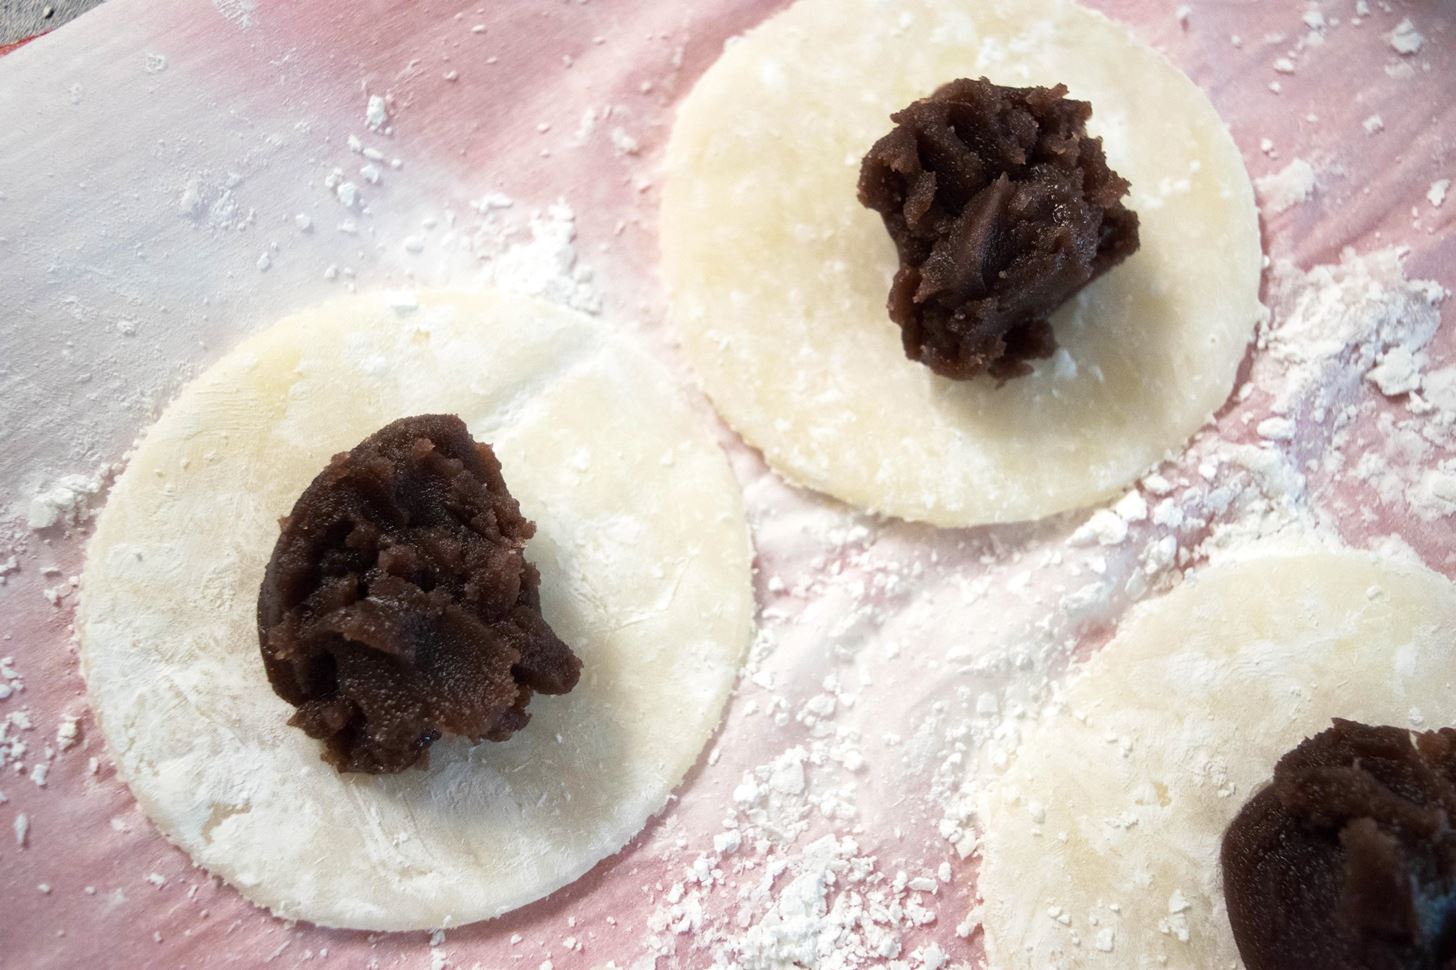 Screw Store Bought—Make Mochi in Minutes in the Microwave